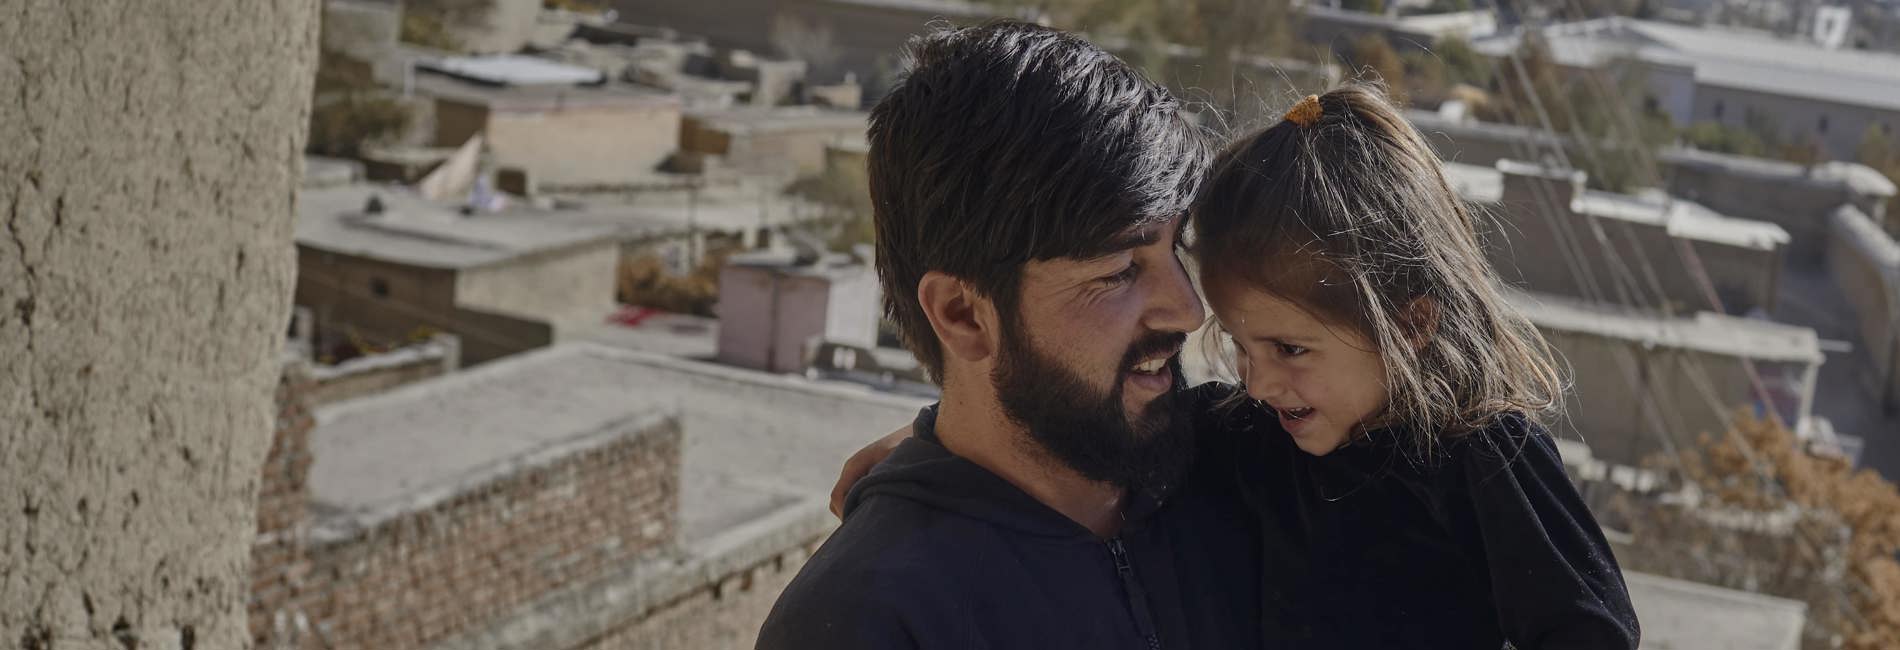 Afghanistan_Abdul Sattar-30-holds-his-daughter-Munawara-4-outside-their-accommodation-in-Kabul